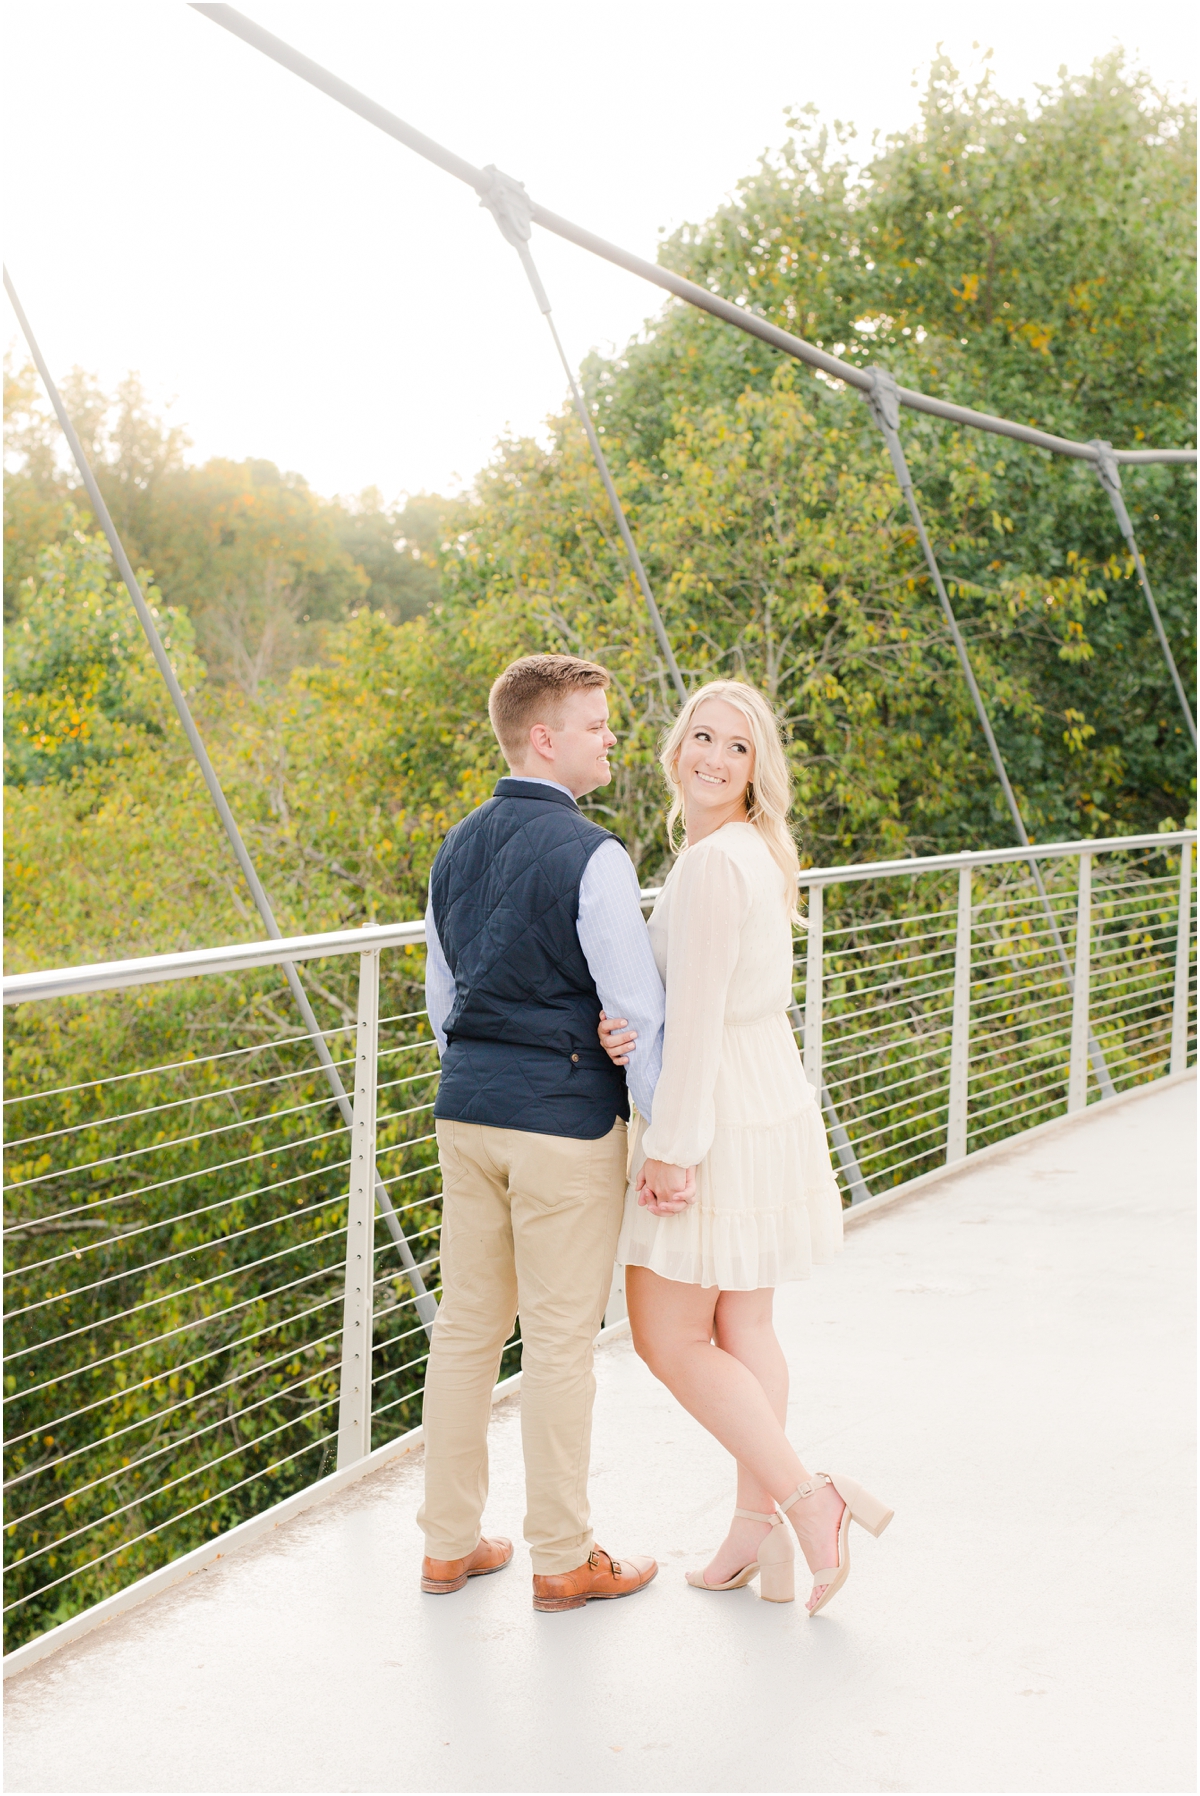 Downtown Greenville engagement session at falls park on the reedy river